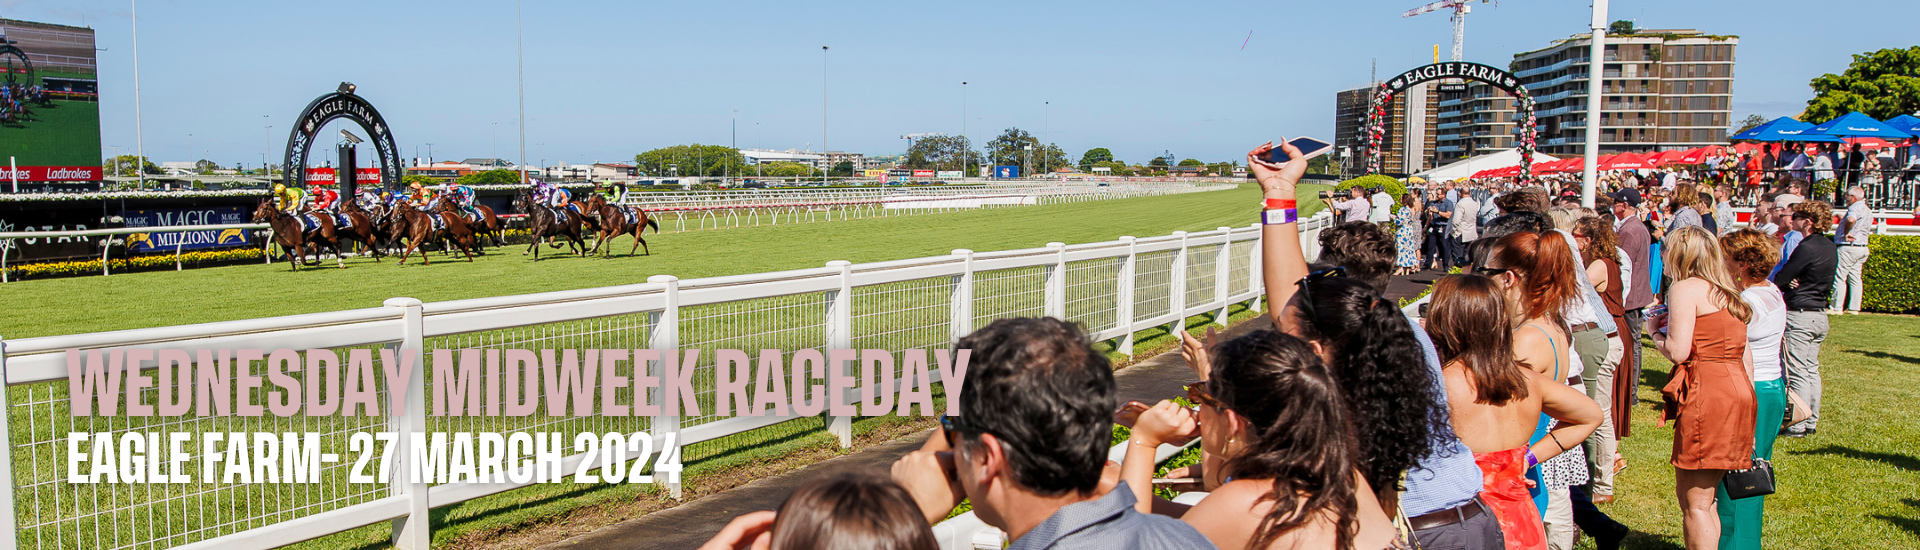 Wednesday Raceday at Eagle Farm | March 27th 2024